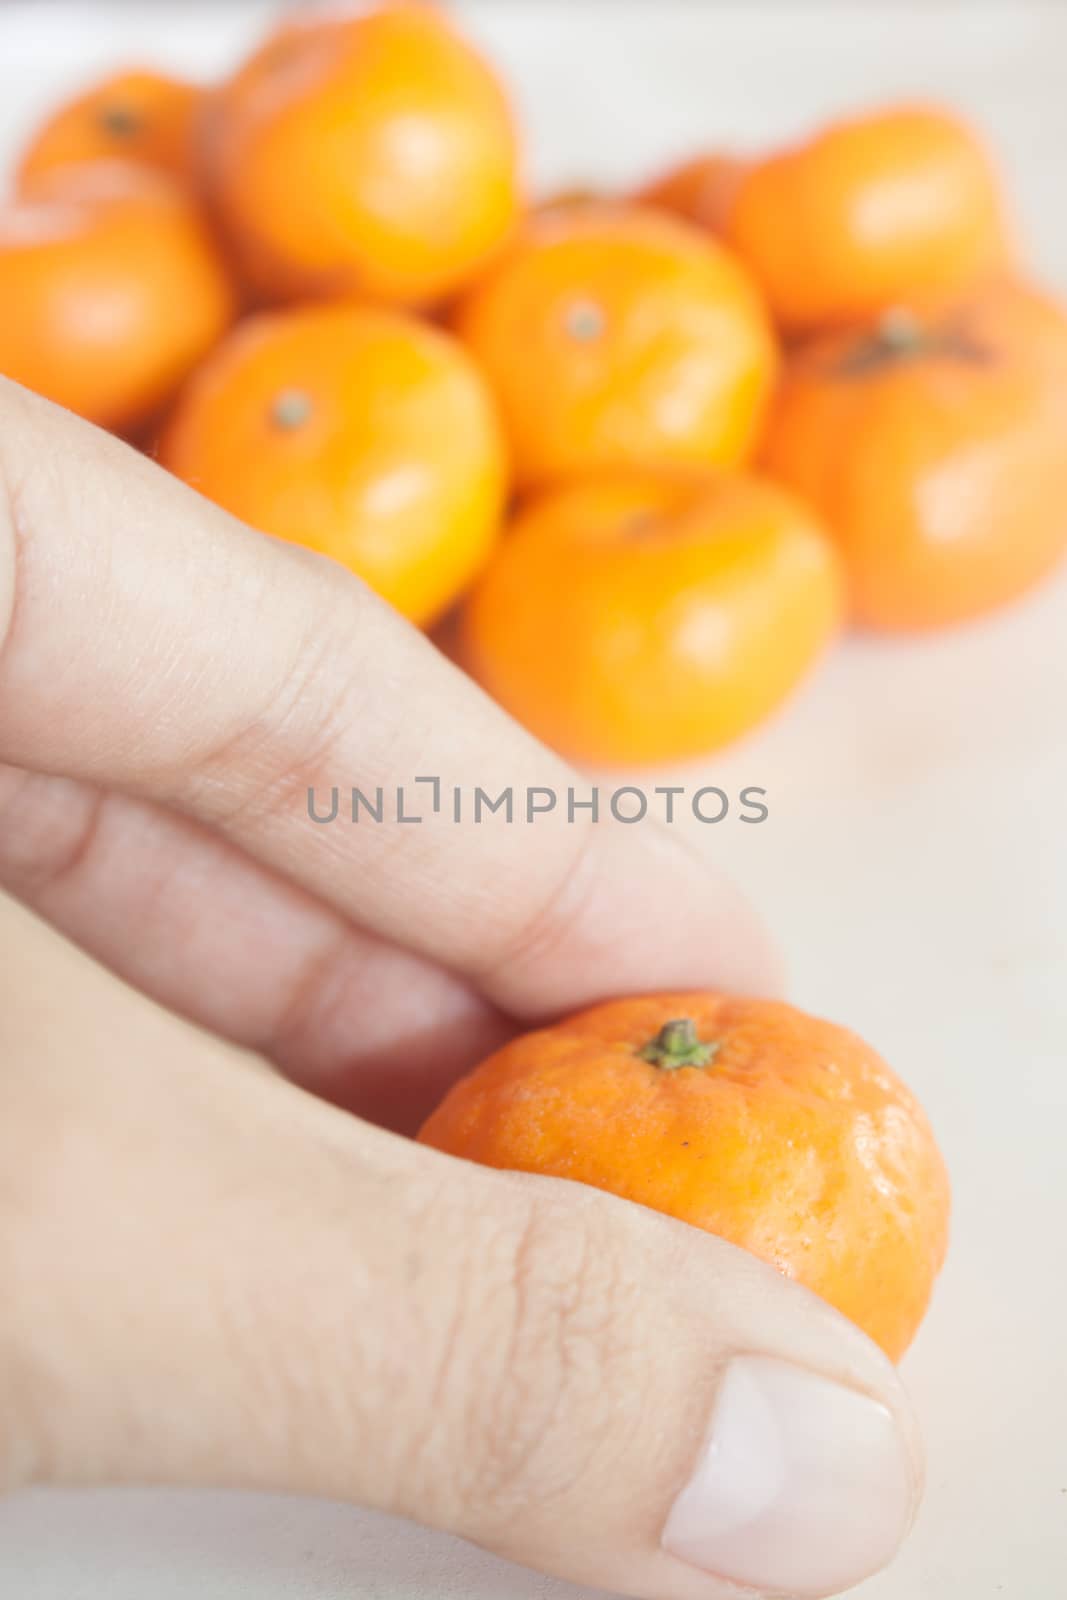 Small oranges grown in Thailand.